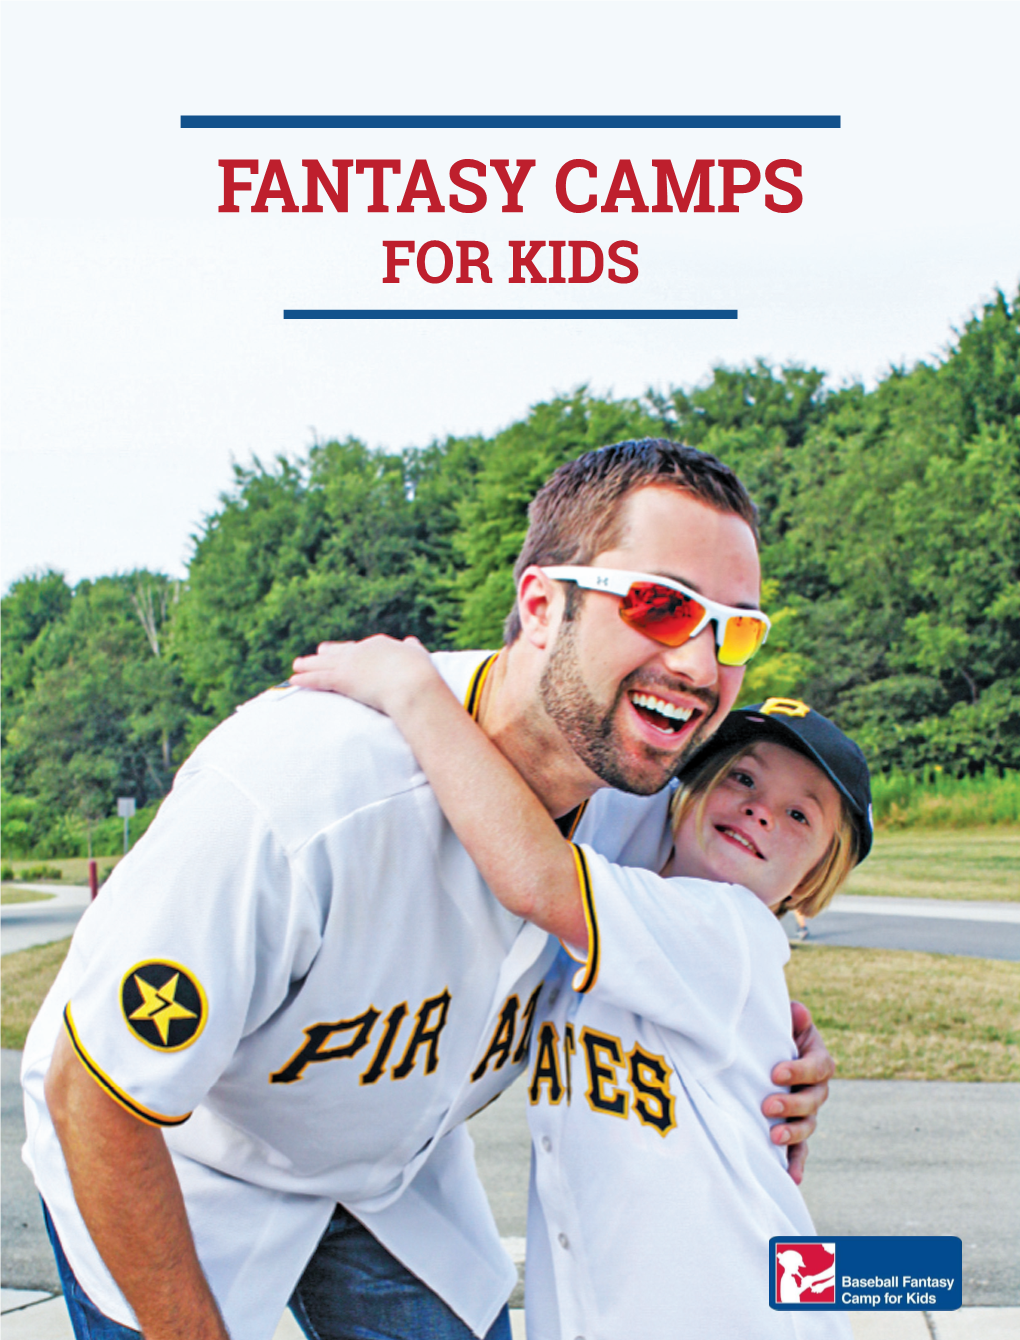 Fantasy Camps for Kids Foundation, You Don’T Have to Lead the League in Scoring to Make a Major-League Impact